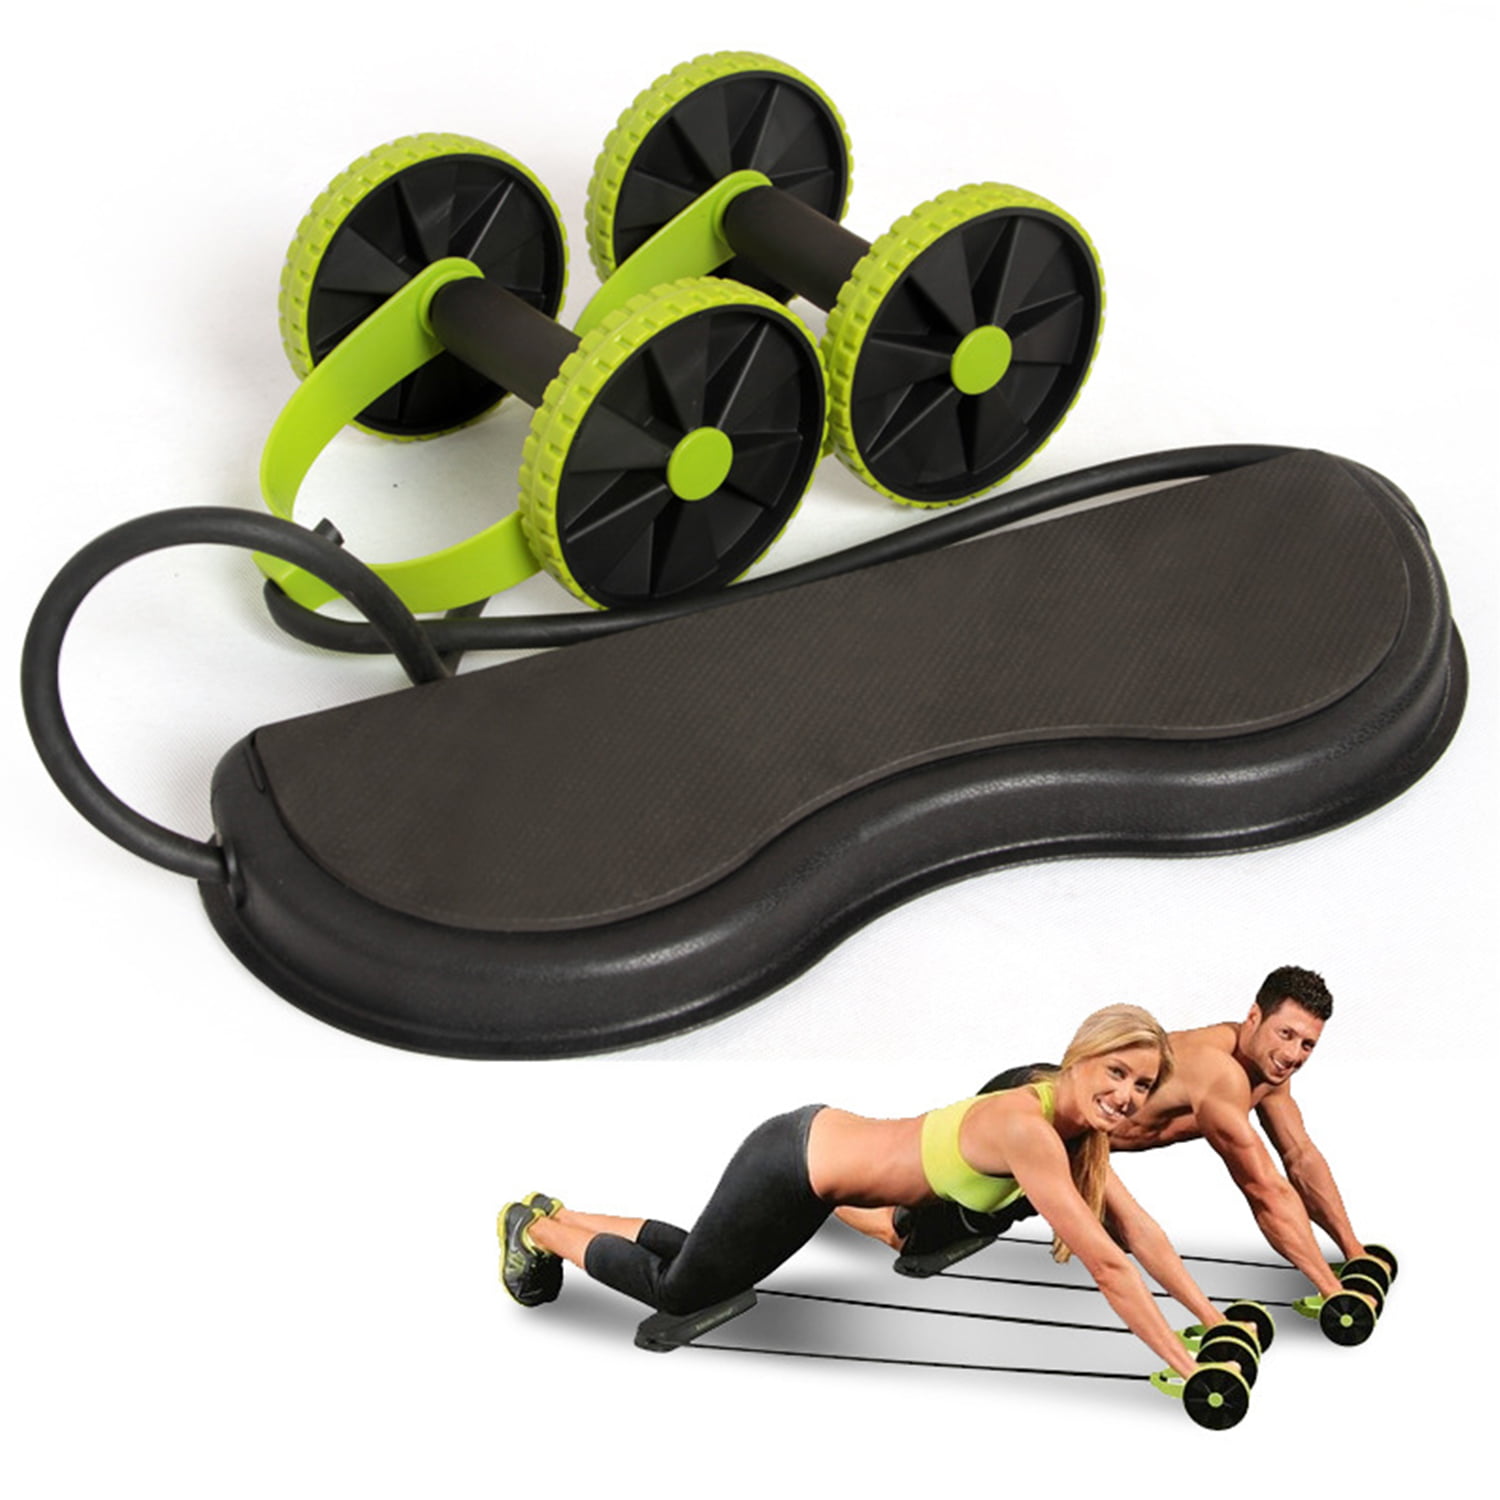 Unisex Abdominal Roller Gym Sport Muscle Exercise Training Fitness With Mat Details about  / HOT